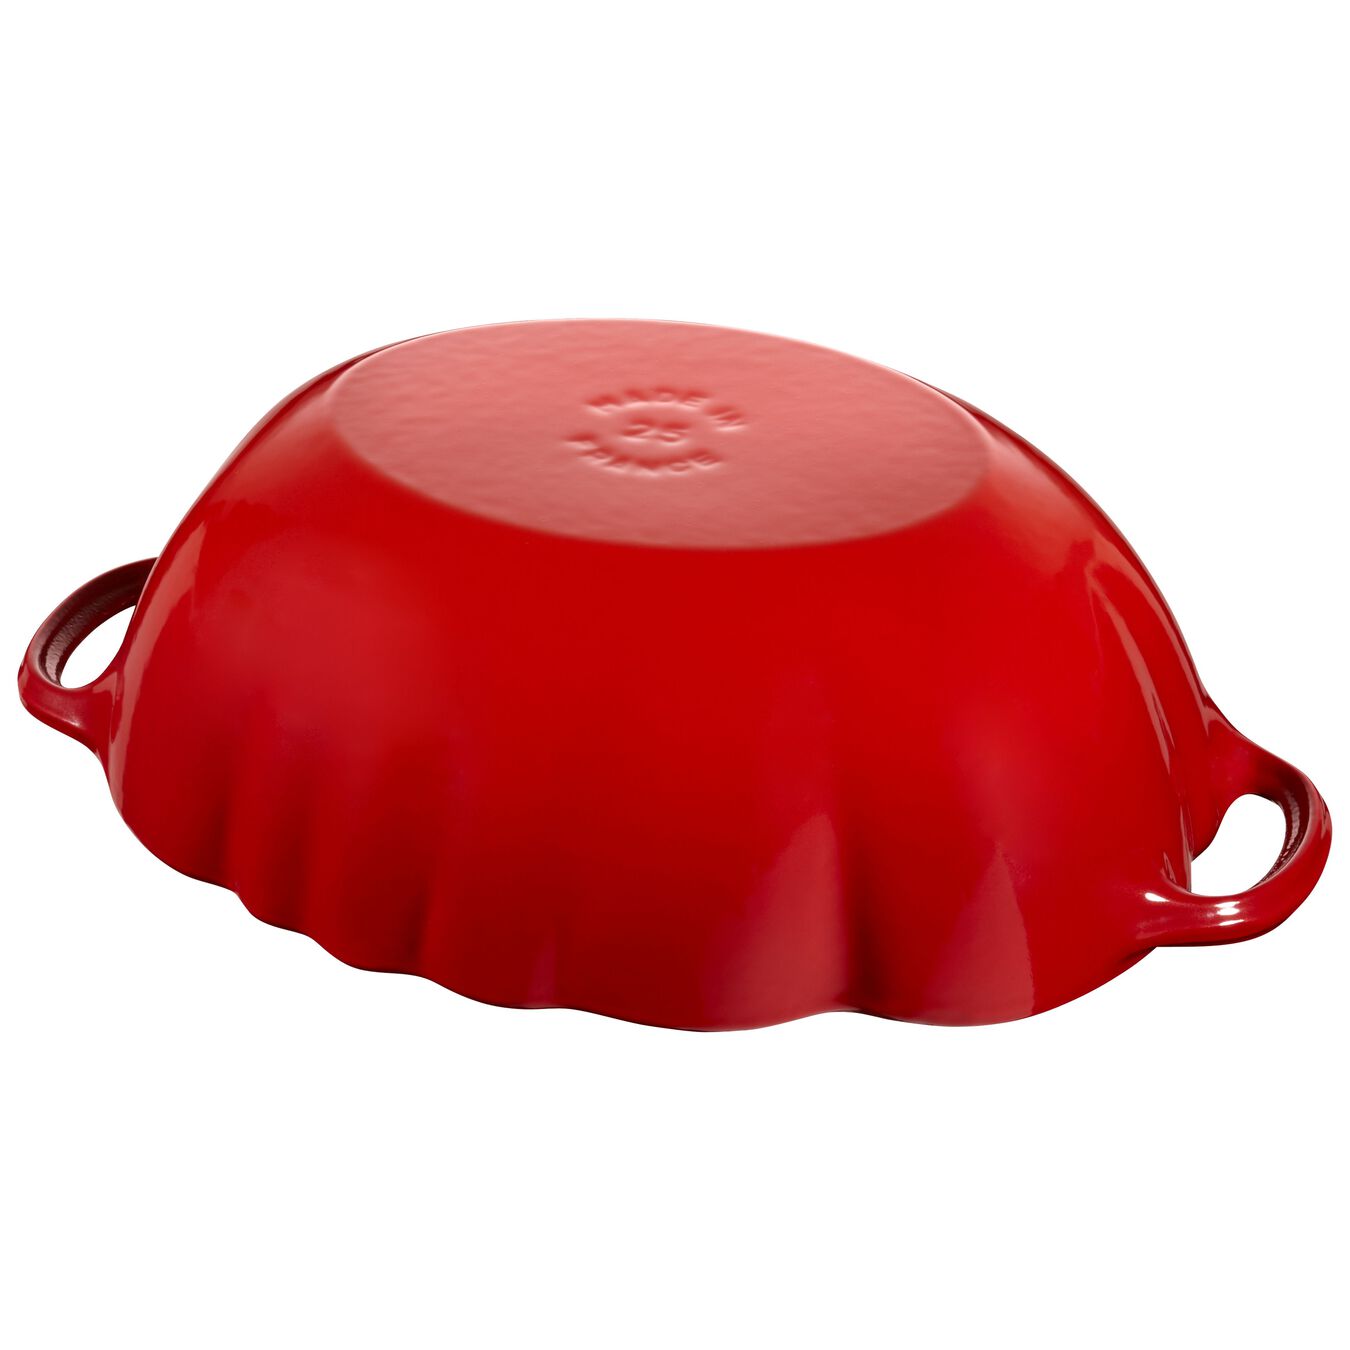 Cocotte 25 cm, Tomate, Kirsch-Rot, Gusseisen,,large 6